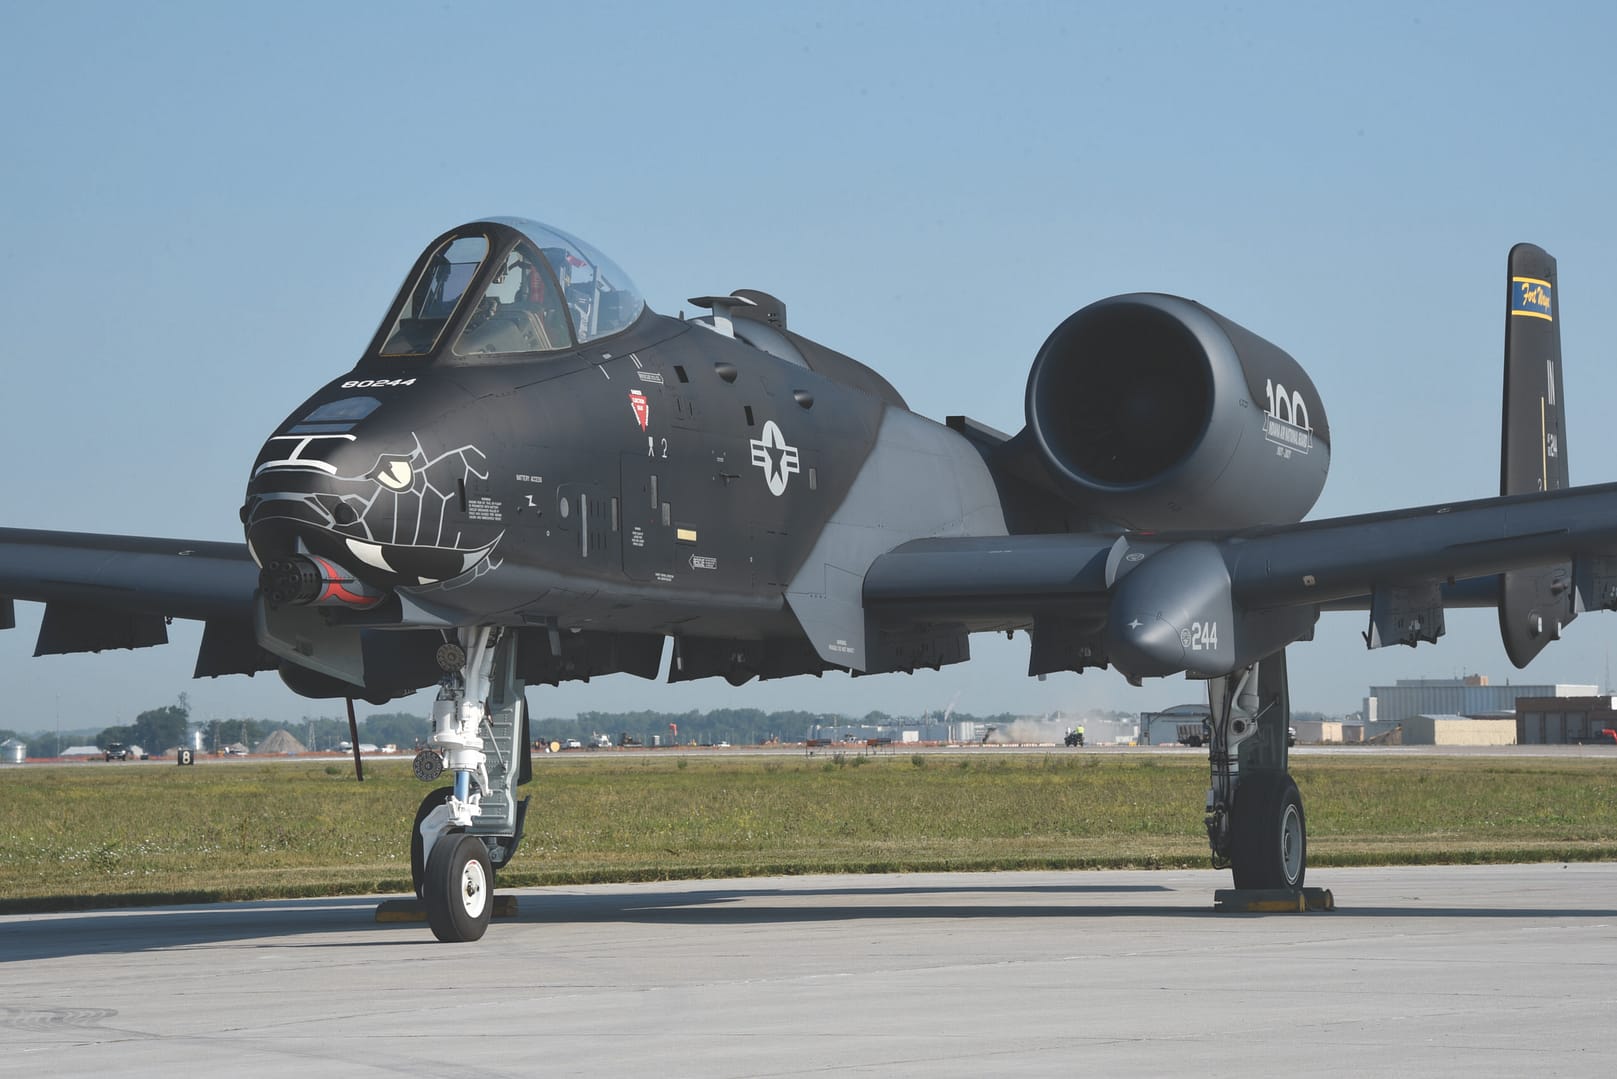 A black and grey U.S. Air Force A-10 Thunderbolt II from the Indiana Air National Guard’s 122nd Fighter Wing “Blacksnakes,” painted at the Air National Guard paint facility in Sioux City, Iowa on July 2, 2021. In a departure from the standard A-10 two-tone grey, the paint scheme was created by request in order to commemorate the 100th anniversary of aviation in the Indiana National Guard.  

U.S. Air National Guard photo: Senior Master Sgt. Vincent De Groot